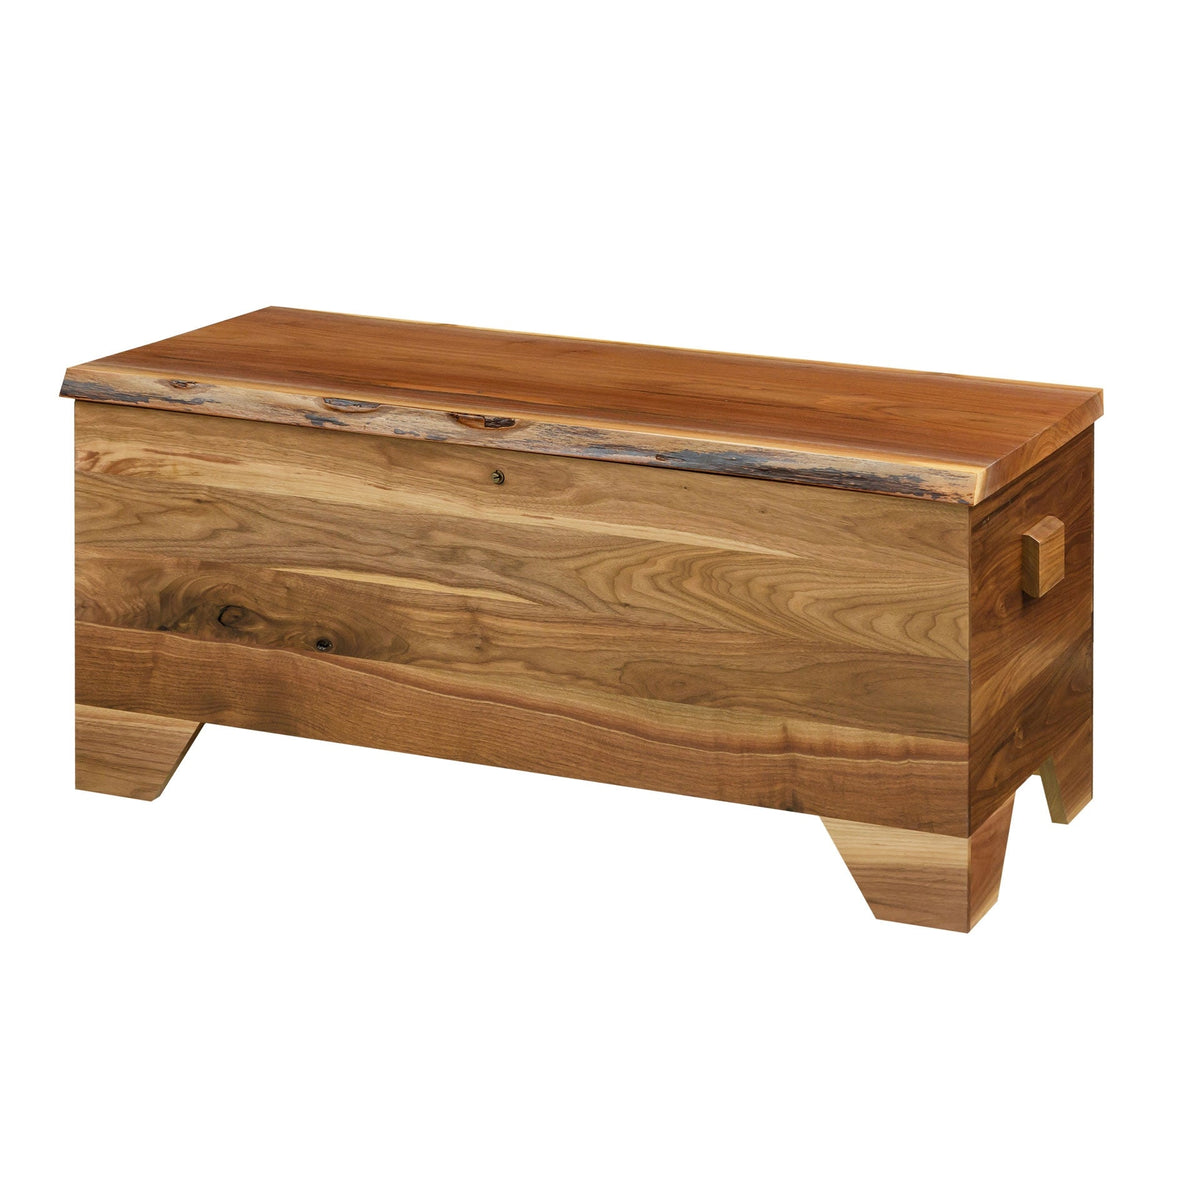 Rustic Hope Chest - snyders.furniture